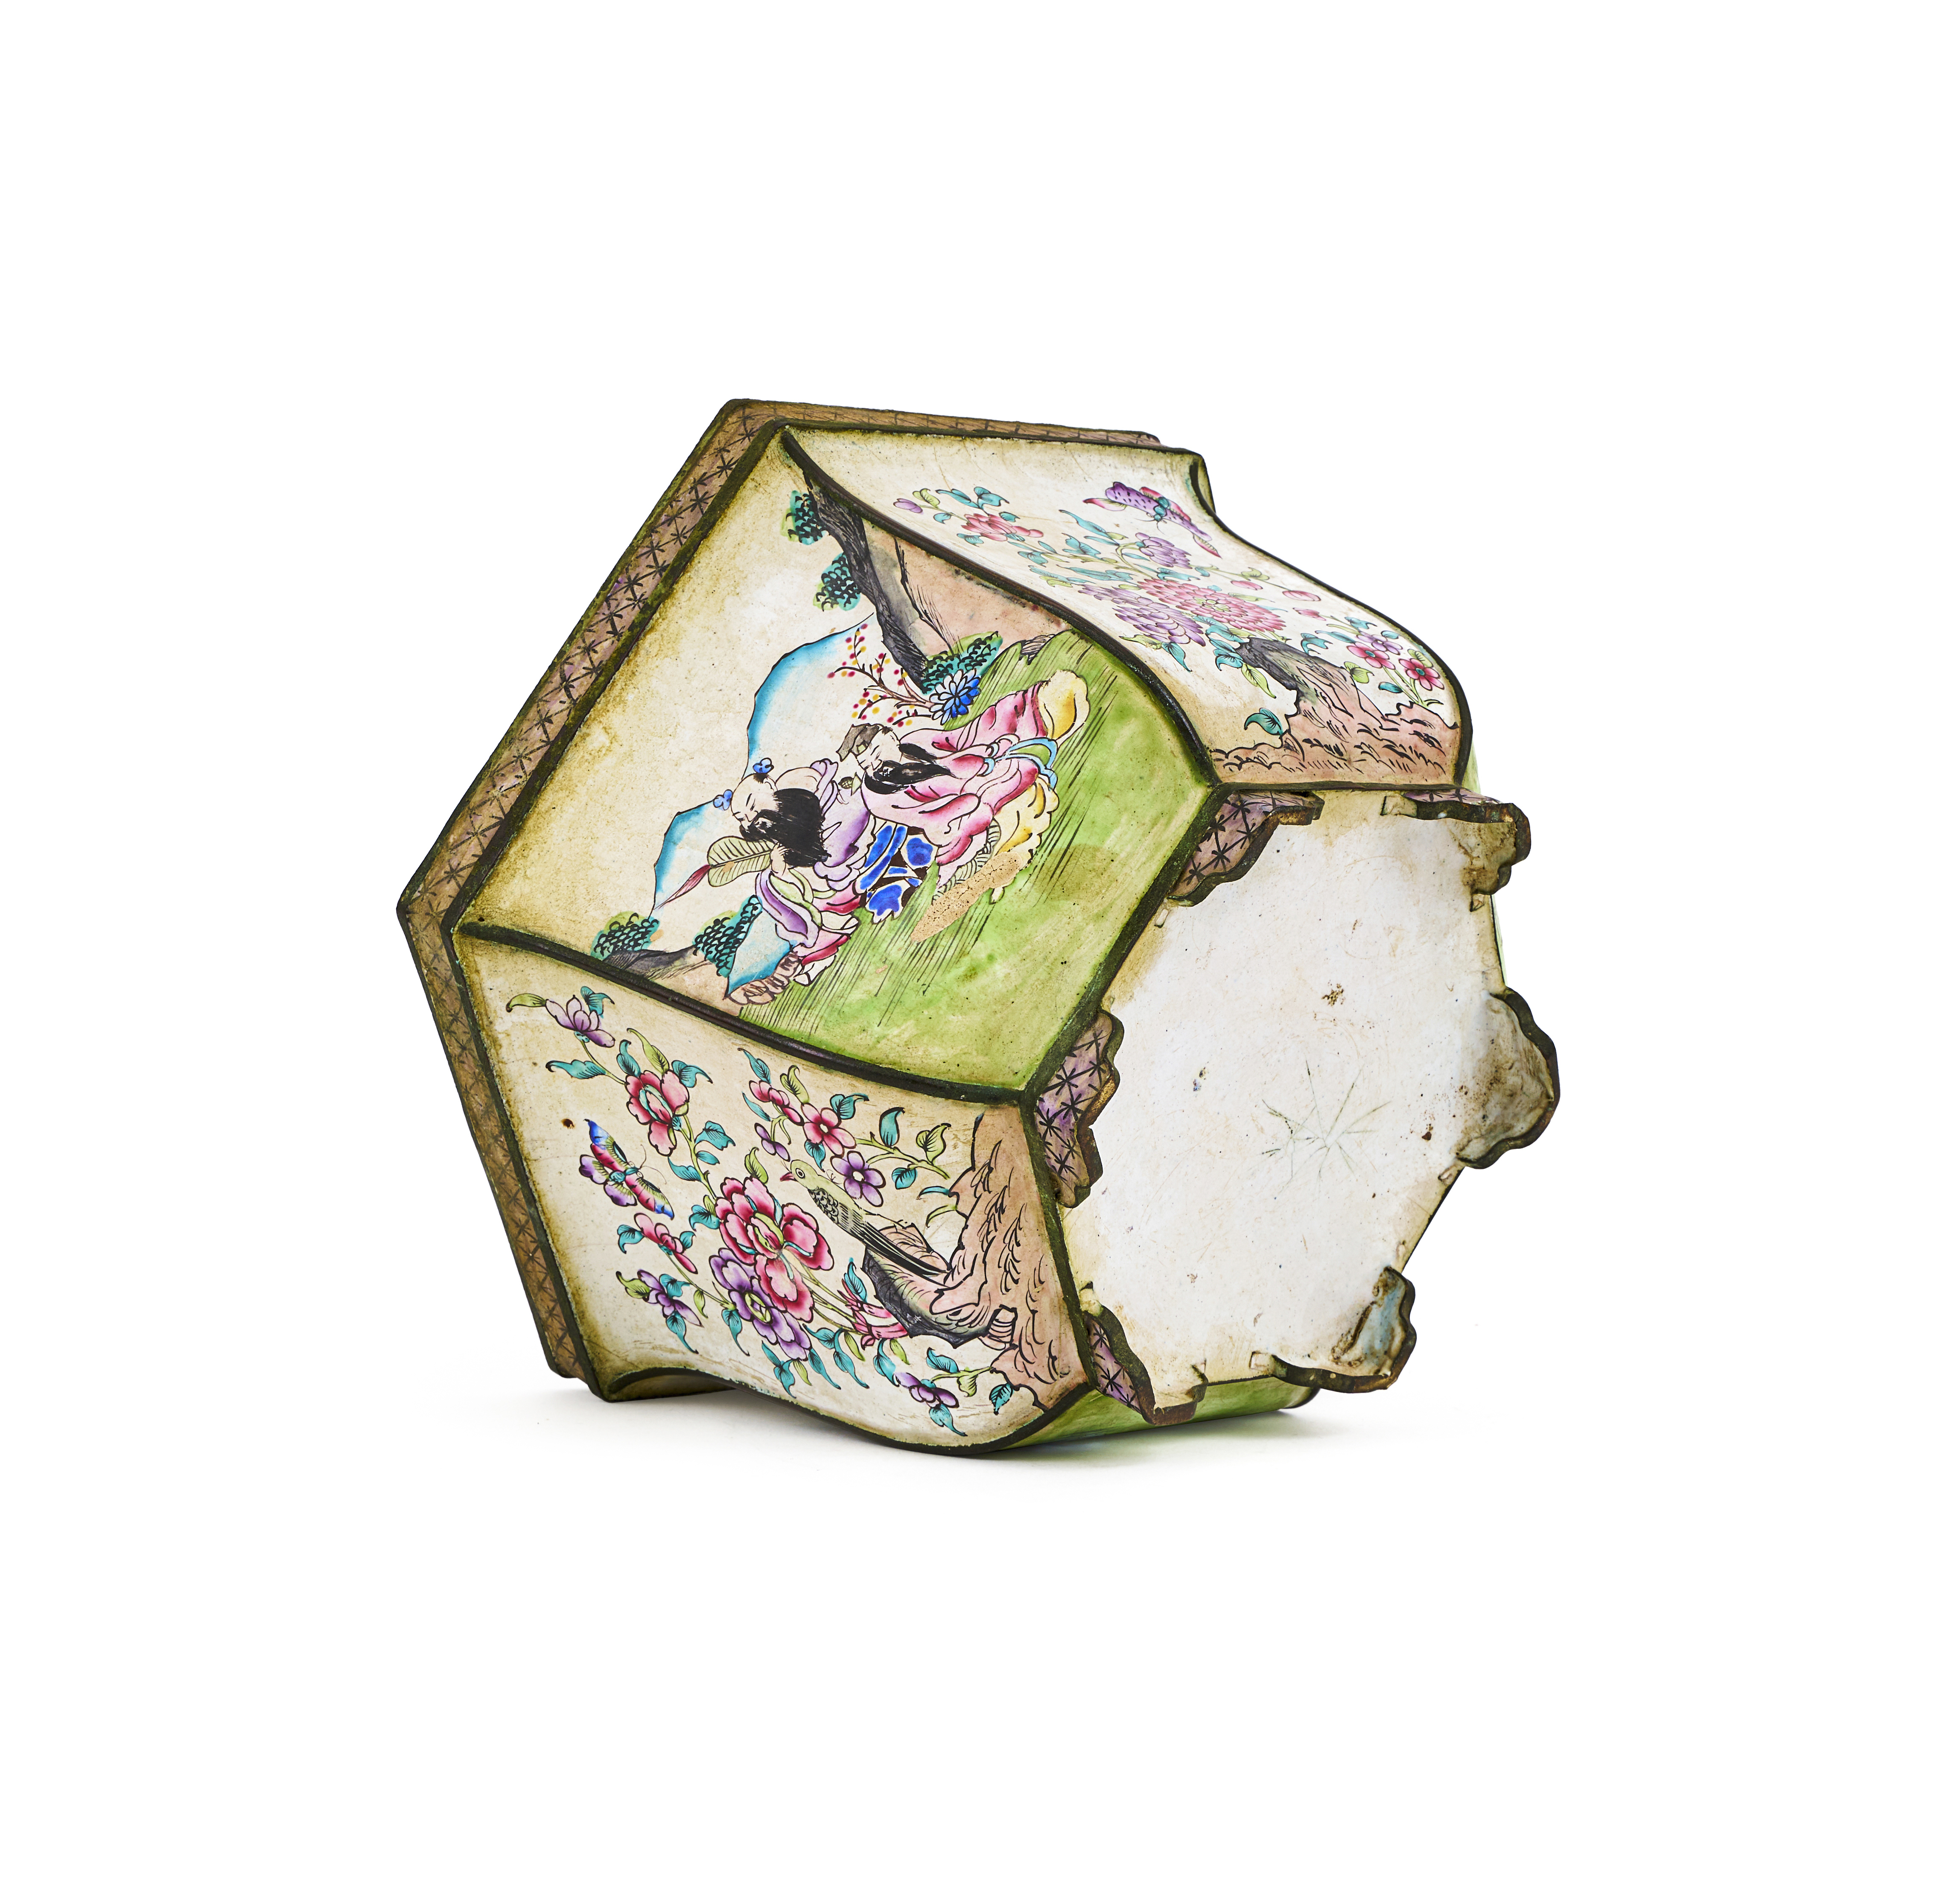 A CHINESE HEXAGONAL CANTON ENAMEL JARDINERE, QING DYNASTY (1644-1911) - Image 5 of 5